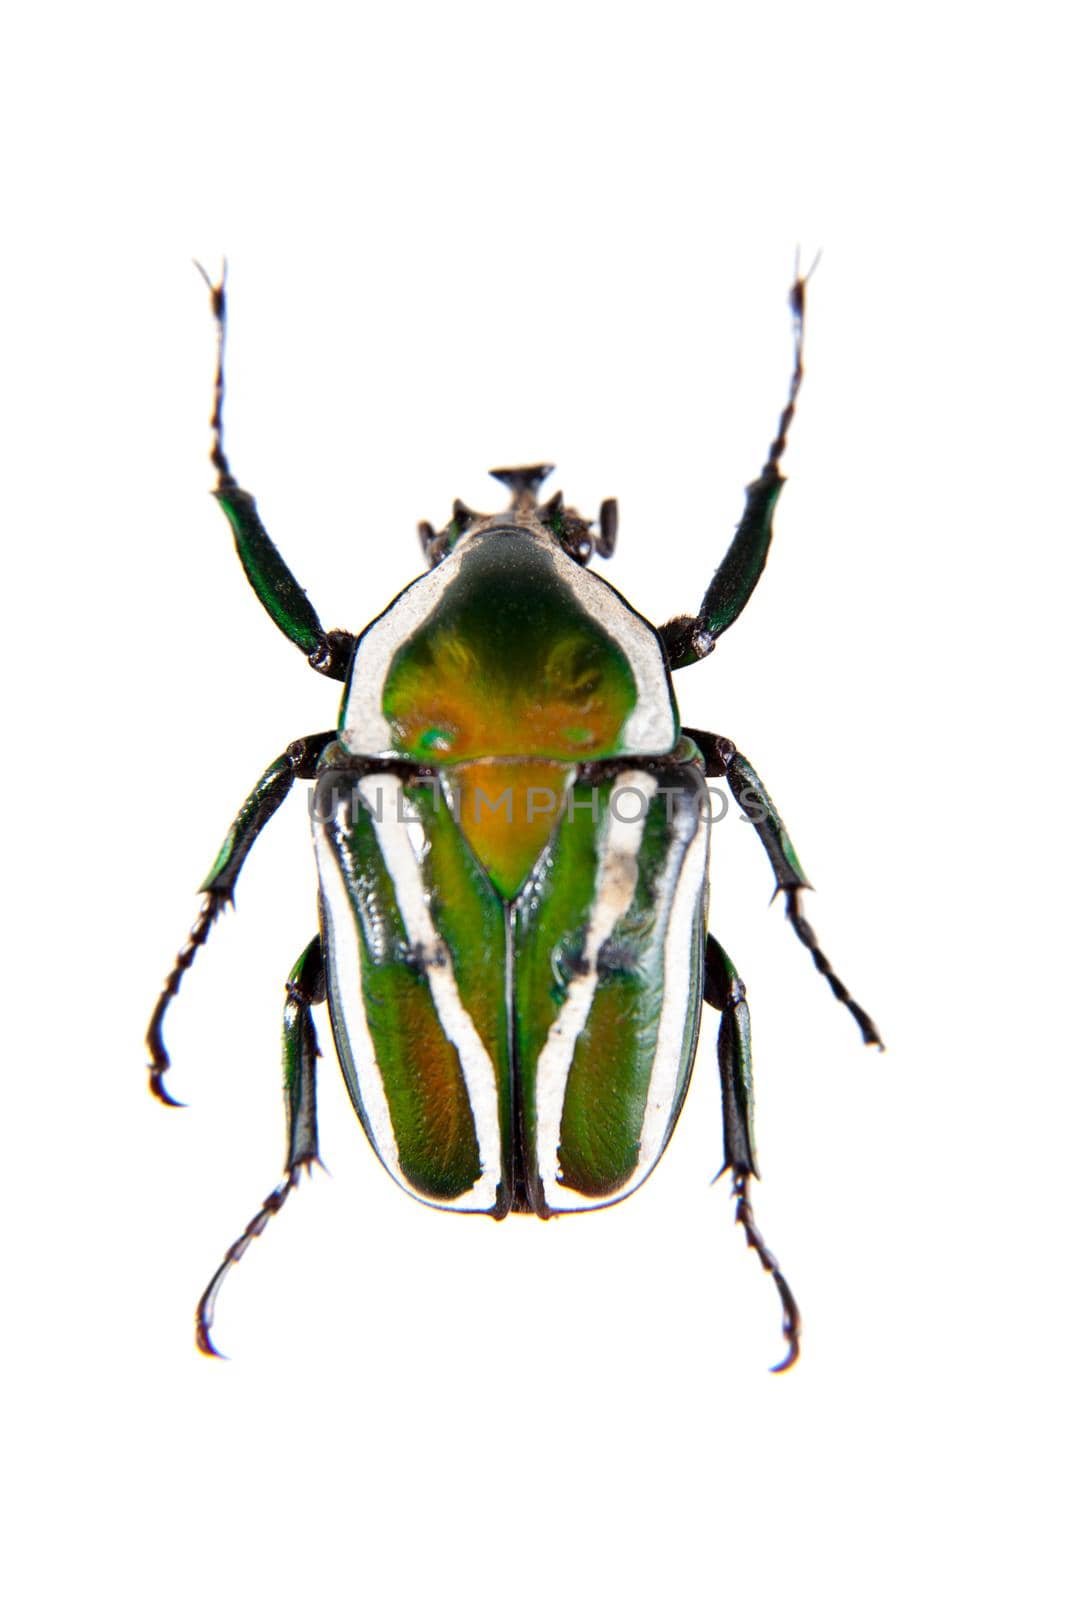 Stripped green beetle on the white background by RosaJay